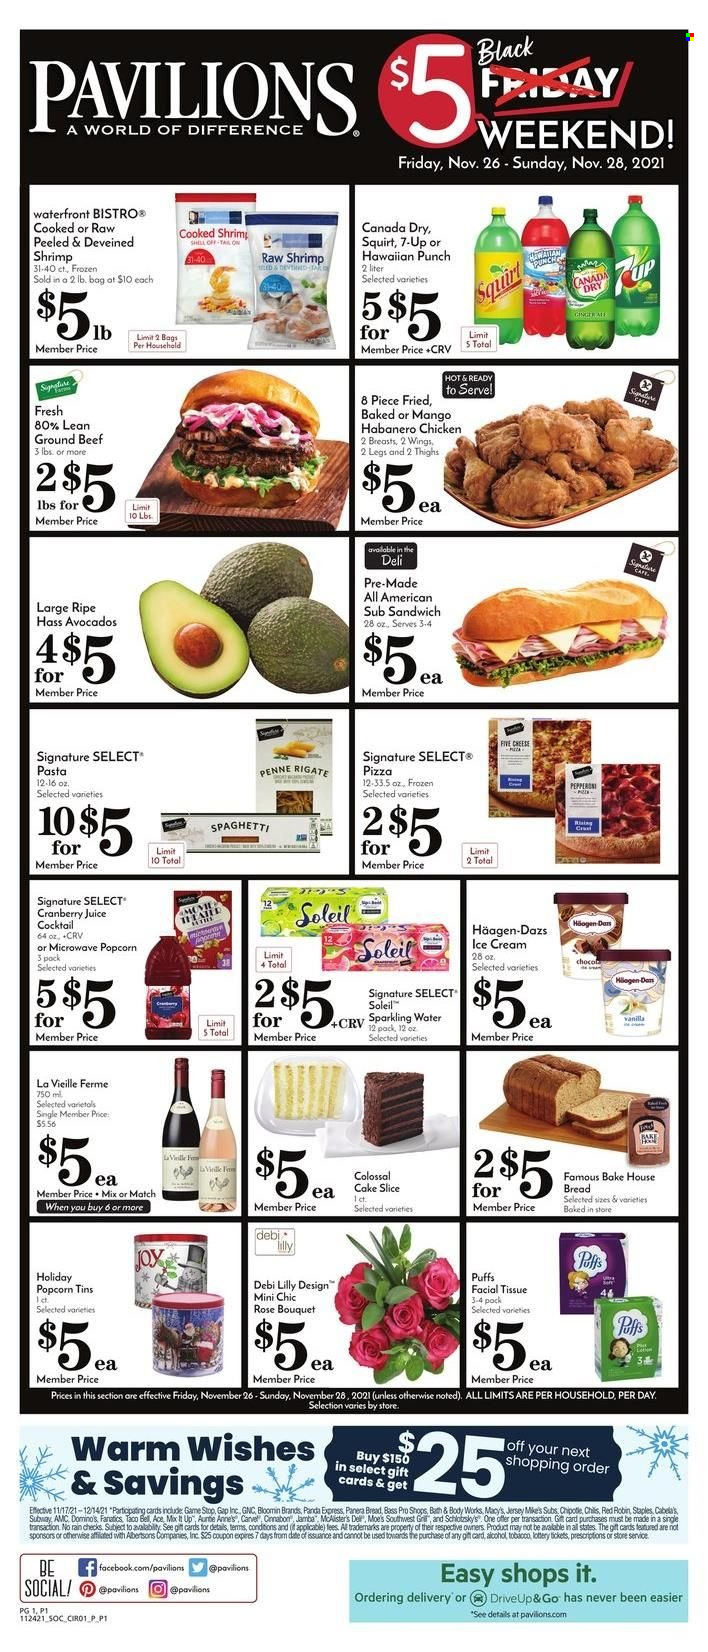 thumbnail - Pavilions Flyer - 11/26/2021 - 11/30/2021 - Sales products - cake, Ace, puffs, avocado, shrimps, spaghetti, pizza, sandwich, pasta, habanero chicken, pepperoni, ice cream, Häagen-Dazs, 7 Days, popcorn, penne, Canada Dry, cranberry juice, juice, 7UP, sparkling water, Illy, wine, alcohol, rosé wine, beef meat, ground beef, tissues, panda, bouquet, rose. Page 1.